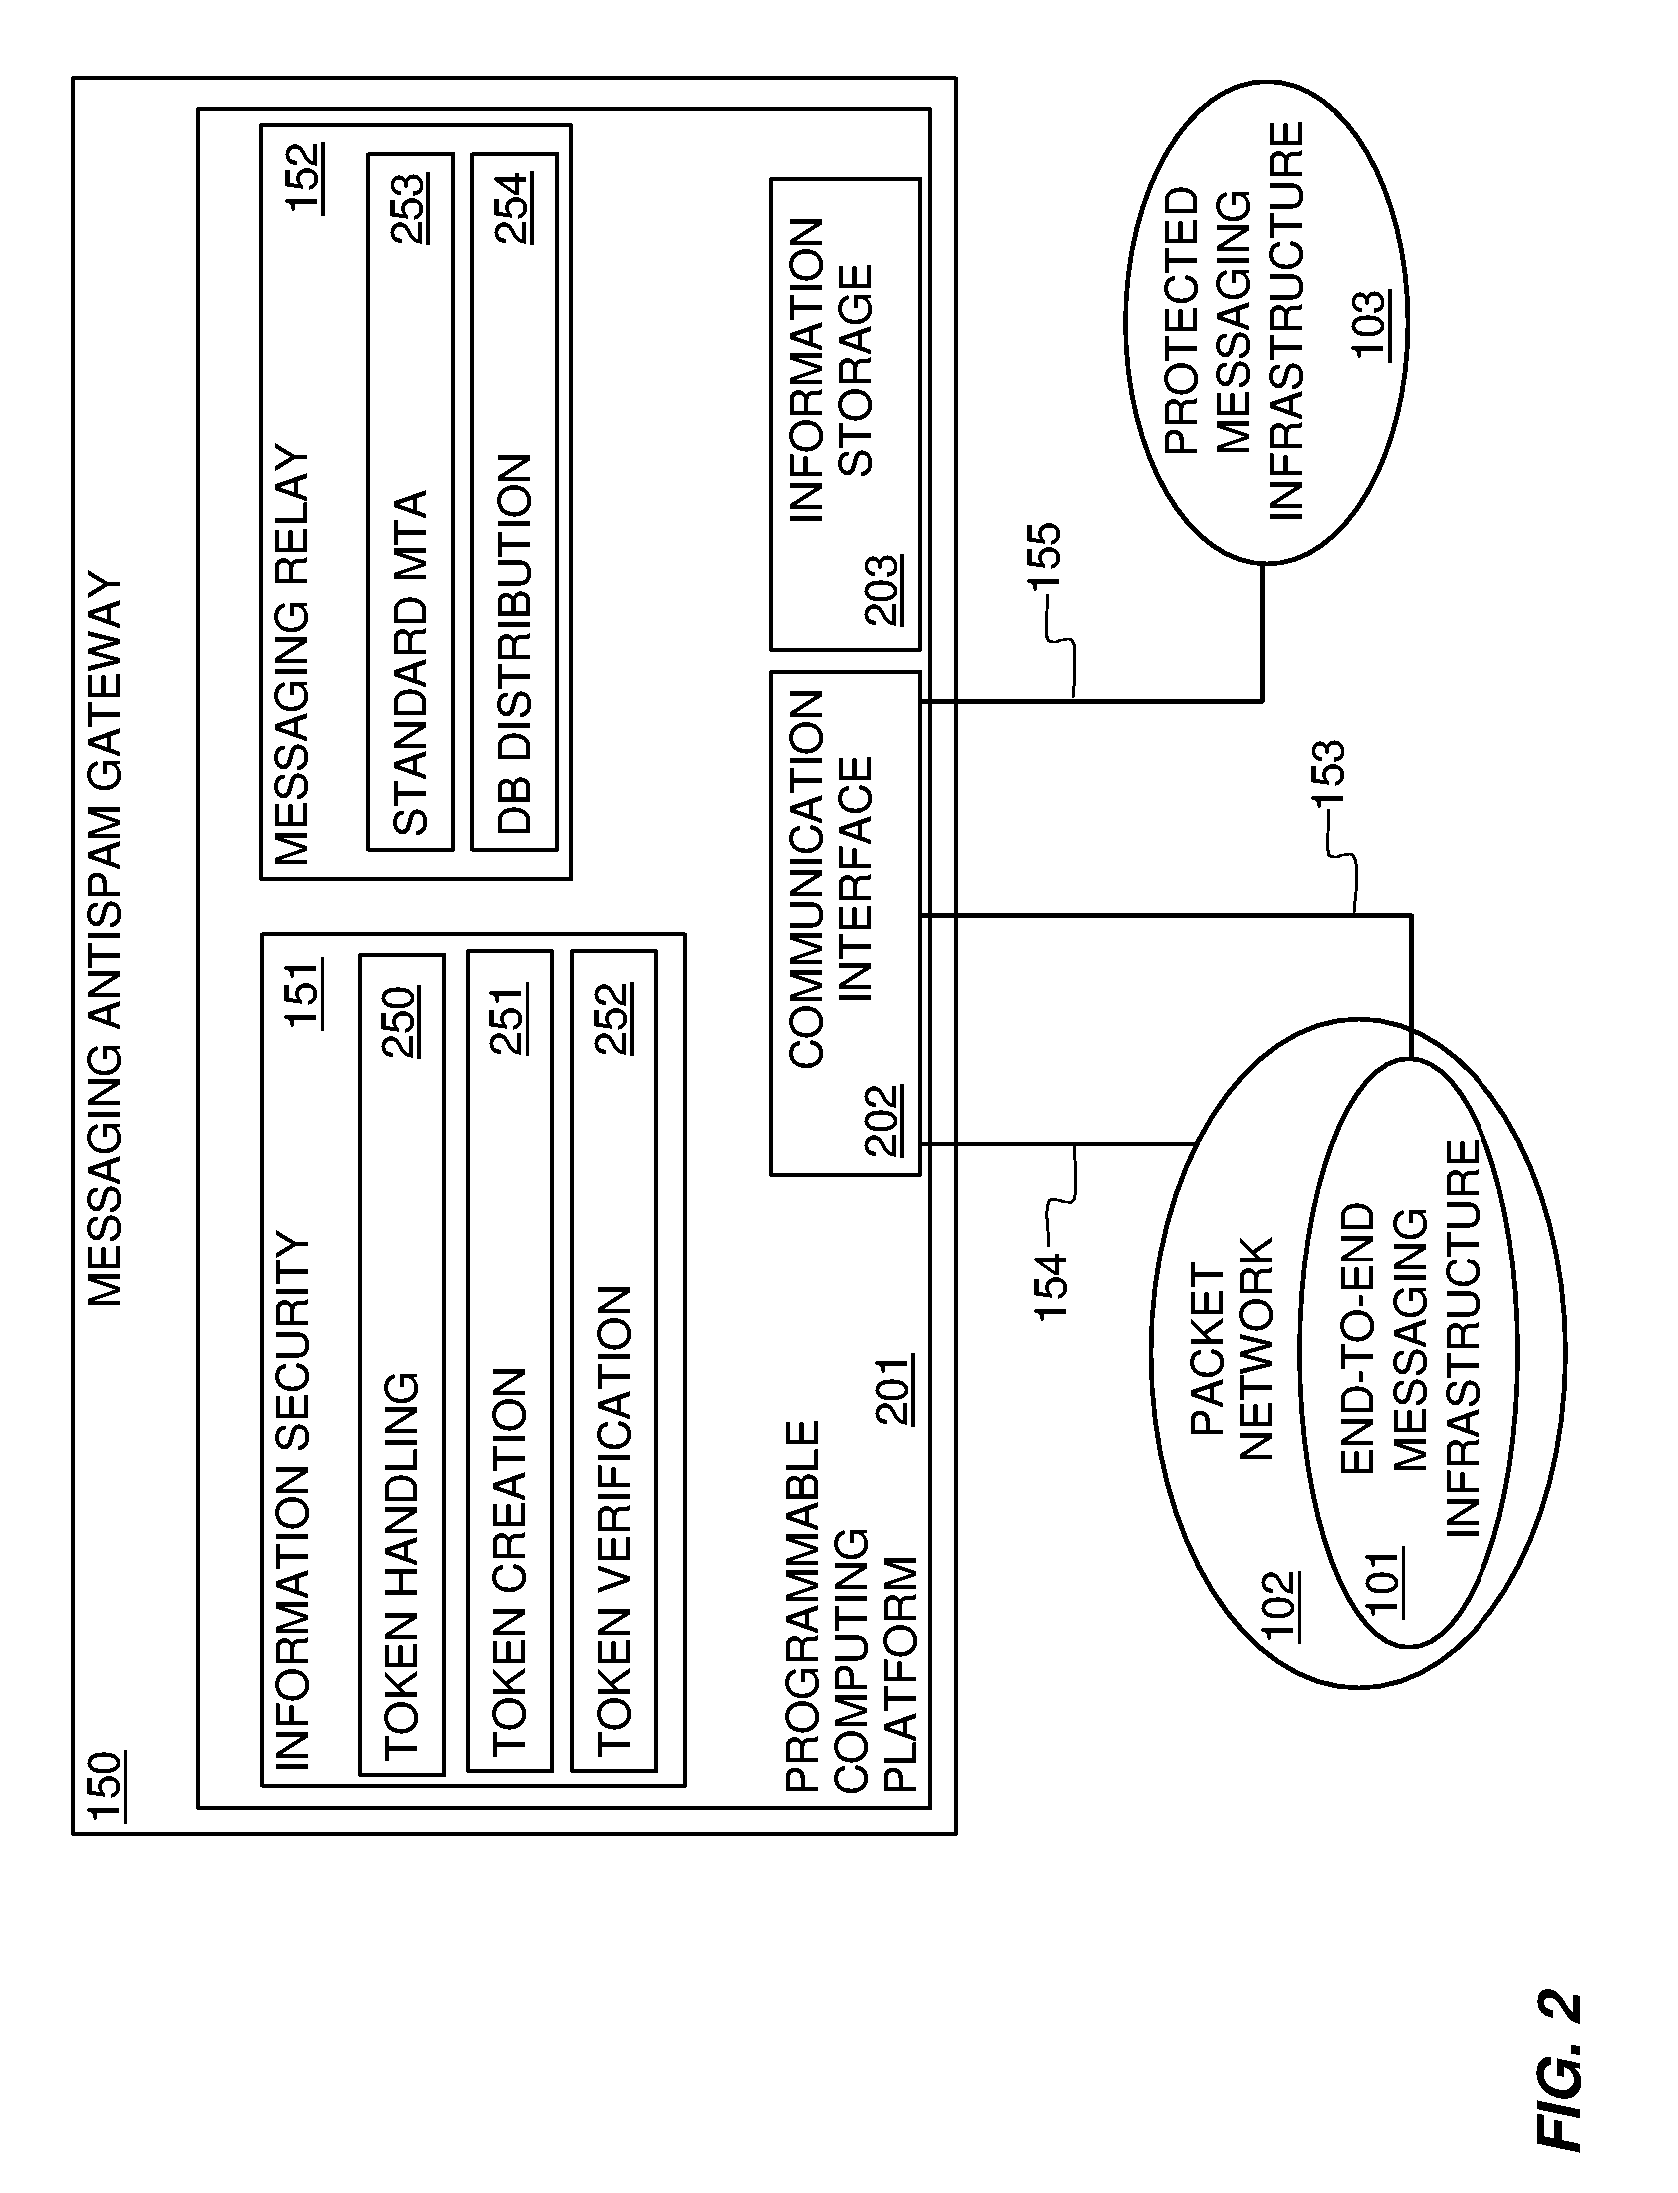 Systems and methods for preventing spam and denial of service attacks in messaging, packet multimedia, and other networks